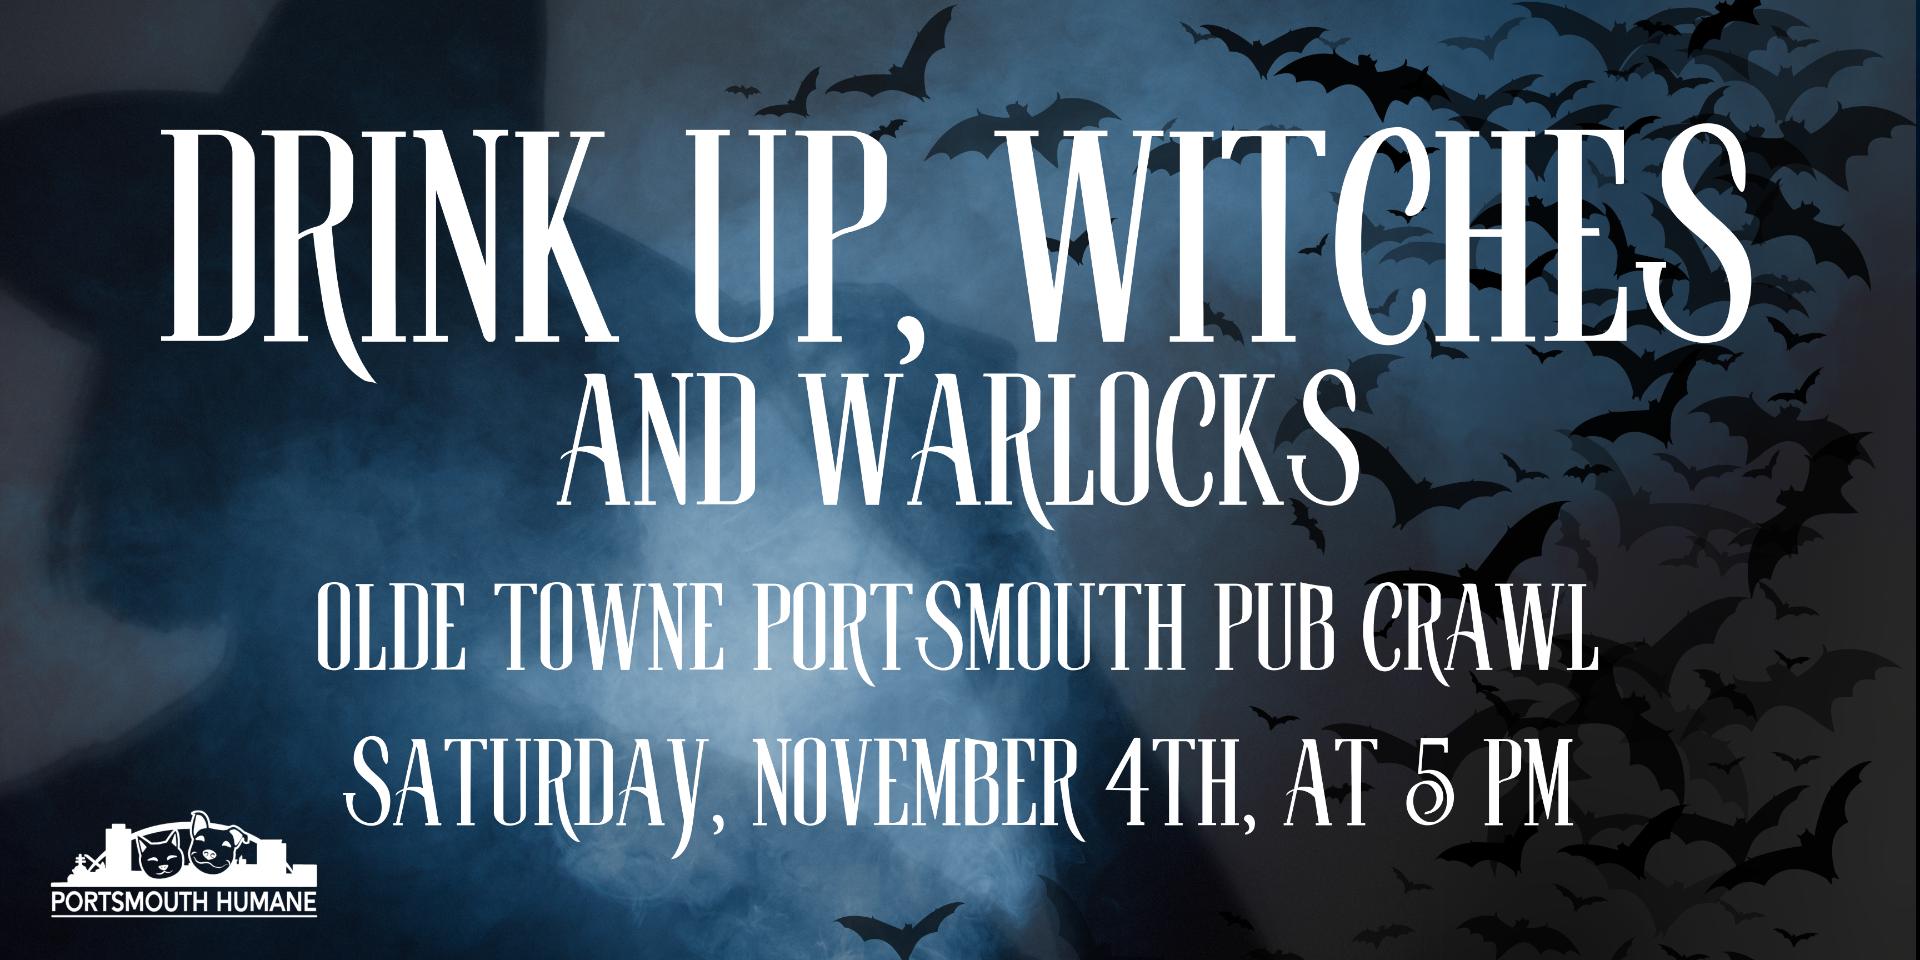 Drink up witches and warlocks.